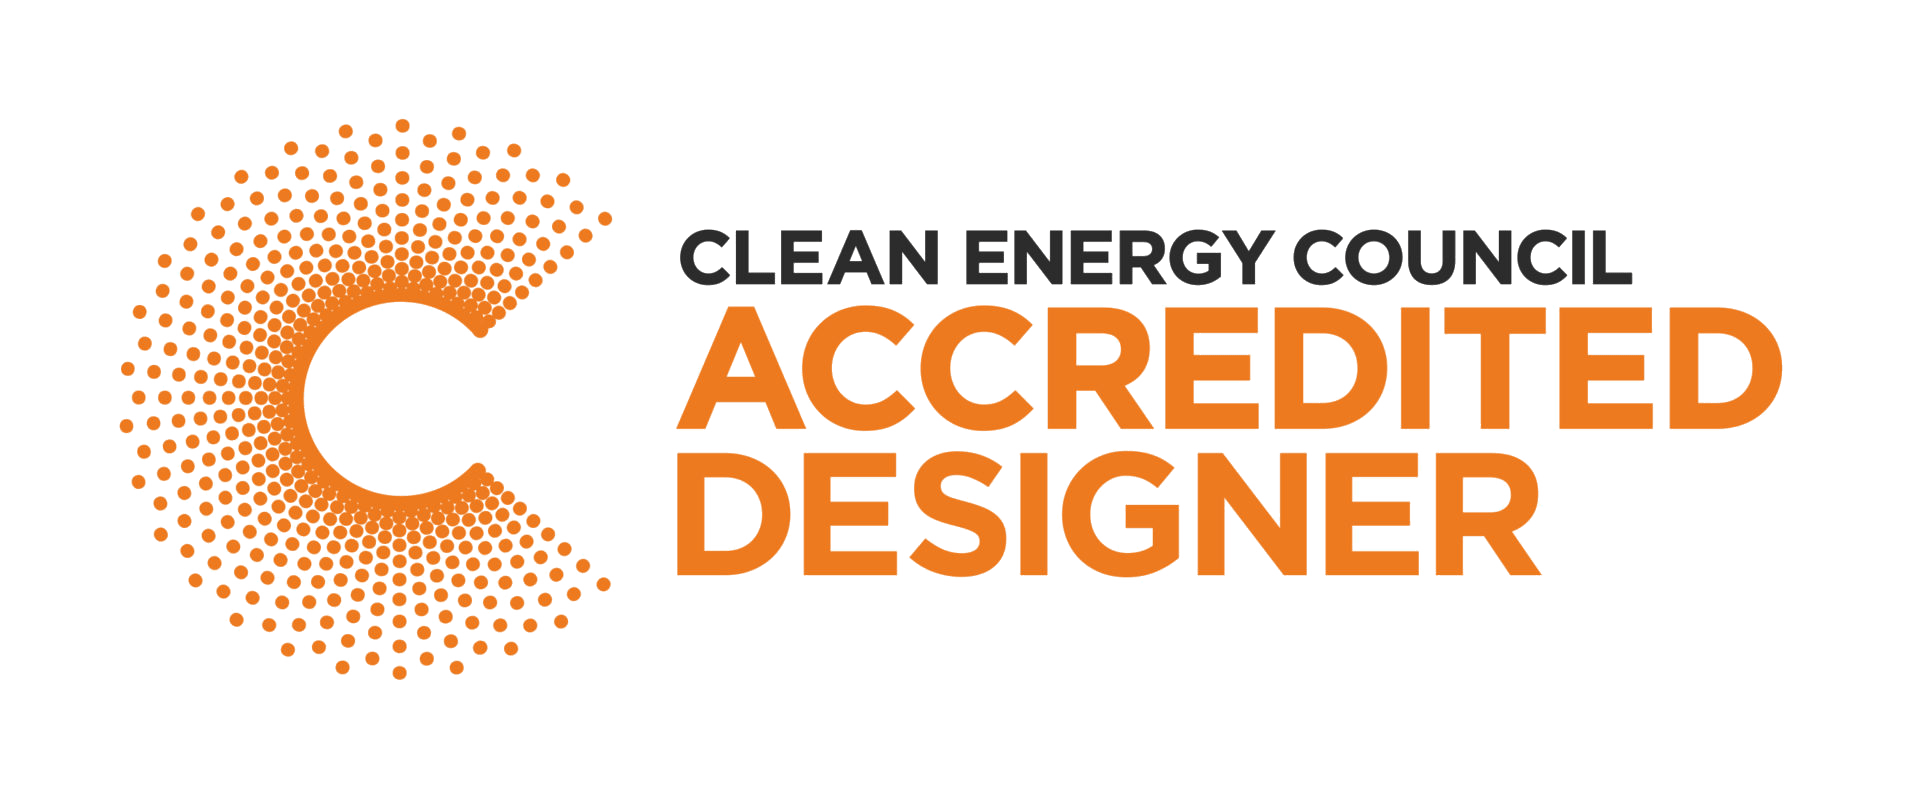 1 Clean Energy Council Accredited Designer